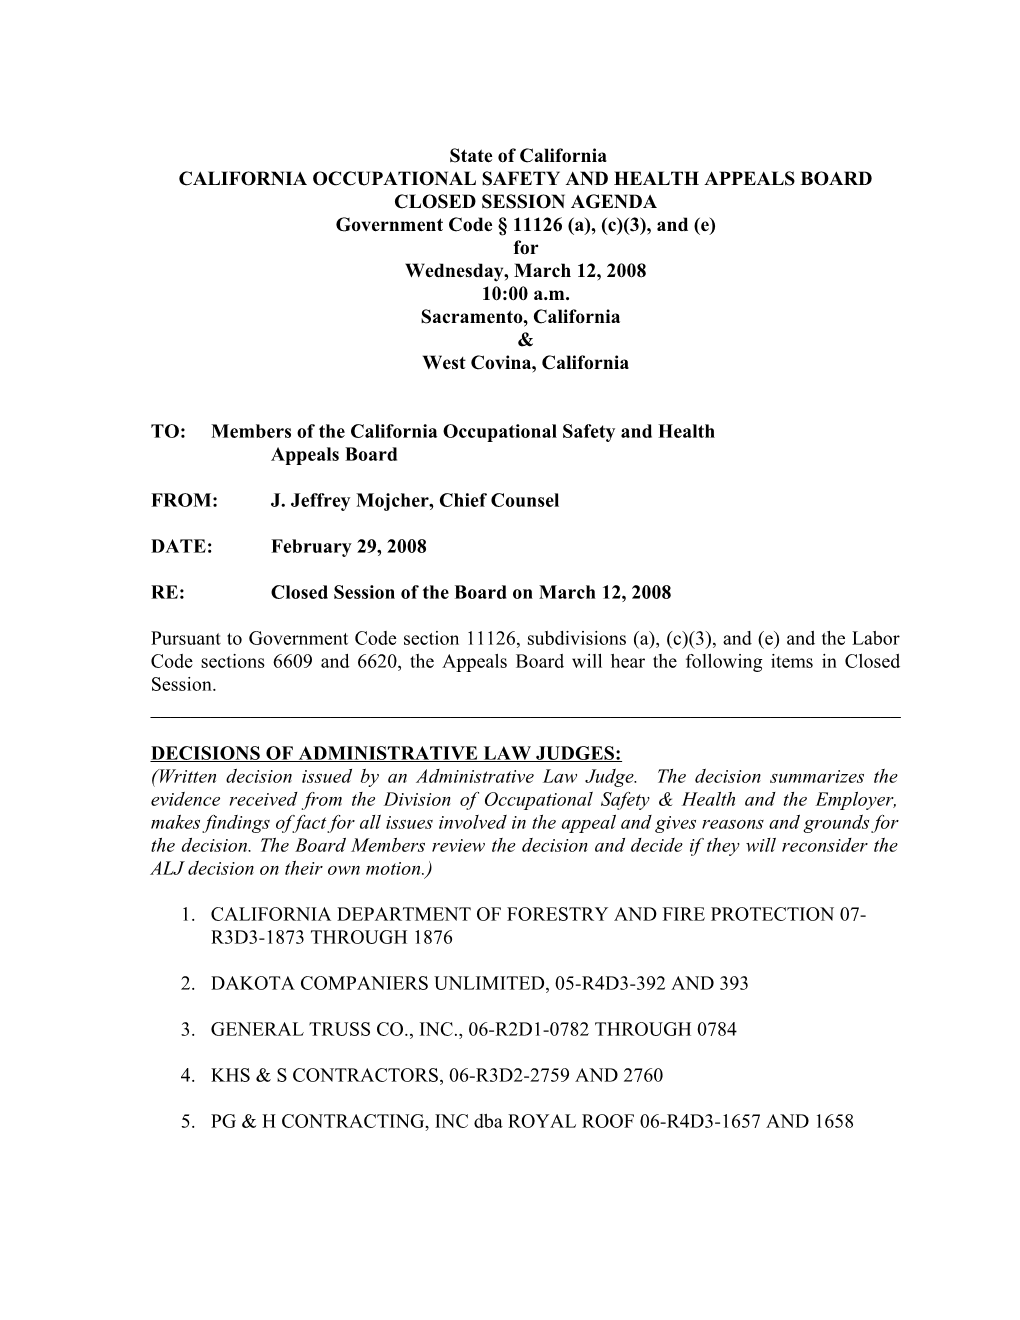 California Occupational Safety & Health Appeals Board s13